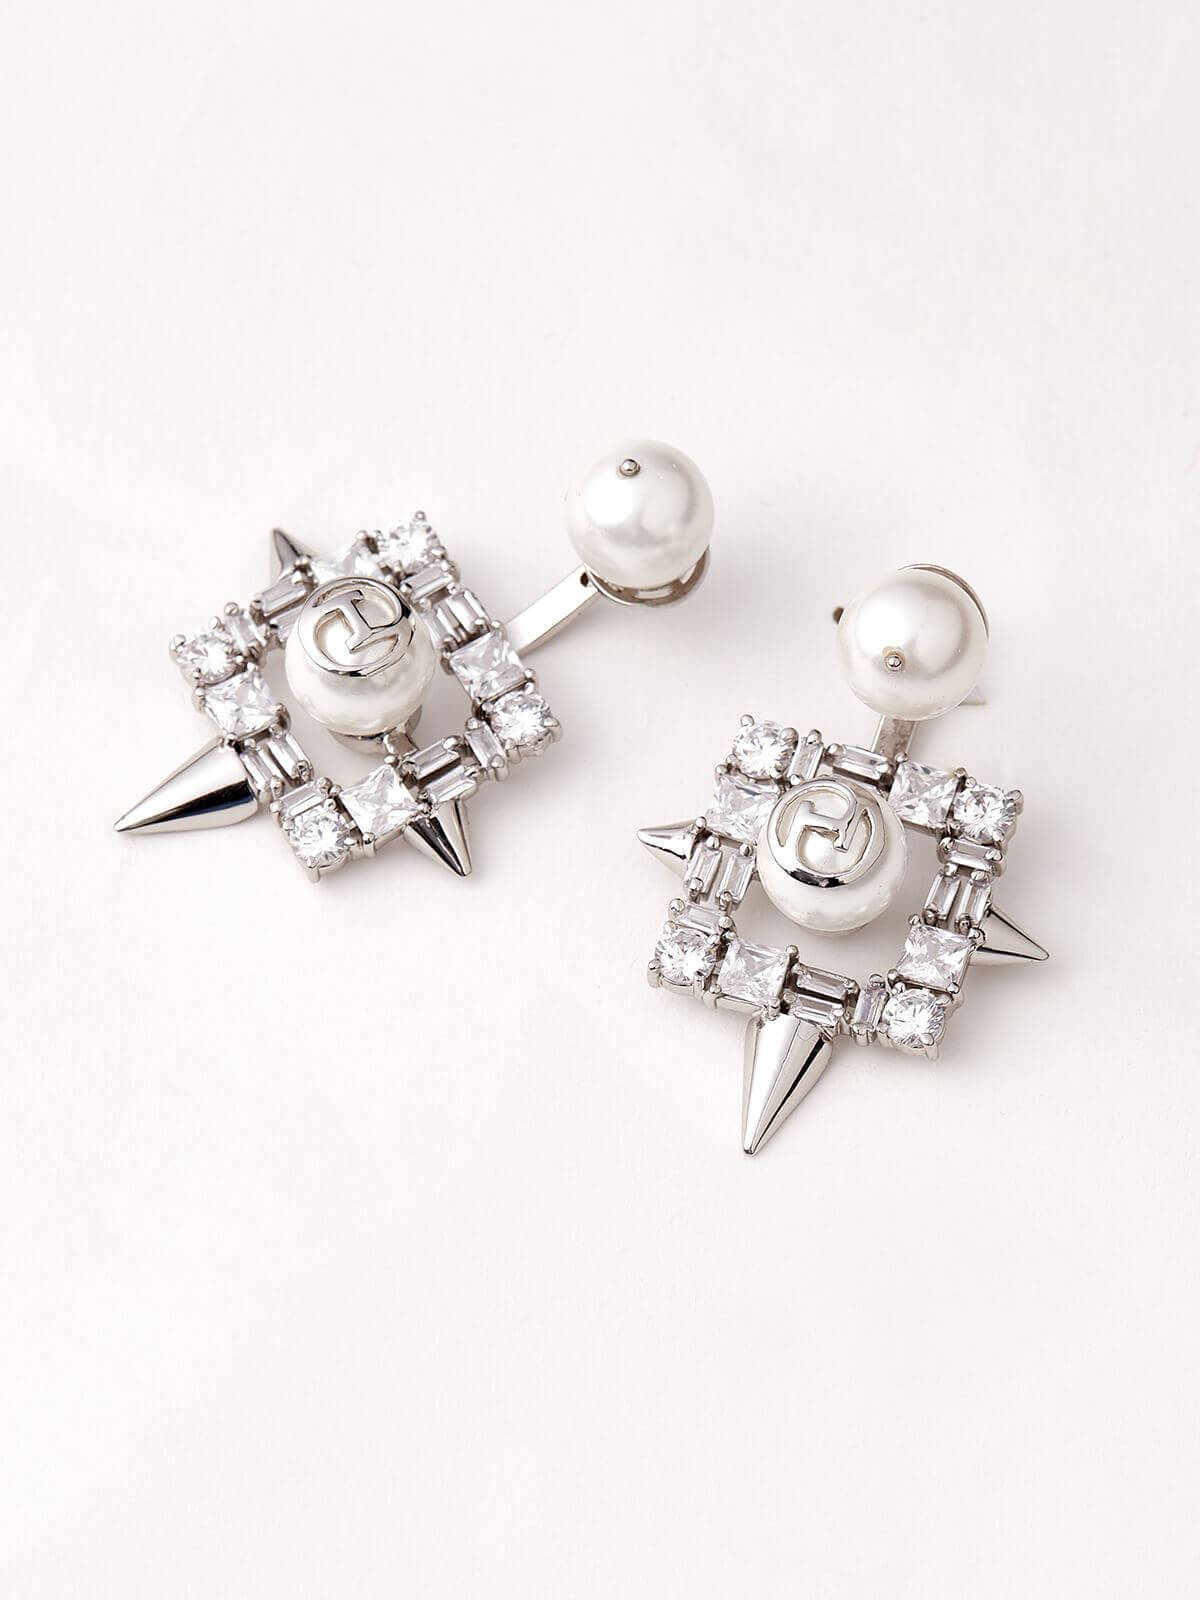 Silver stud with beads on the base | Circle Designer Stud Silver Earring -  Earrings, Jewellery - FOLKWAYS